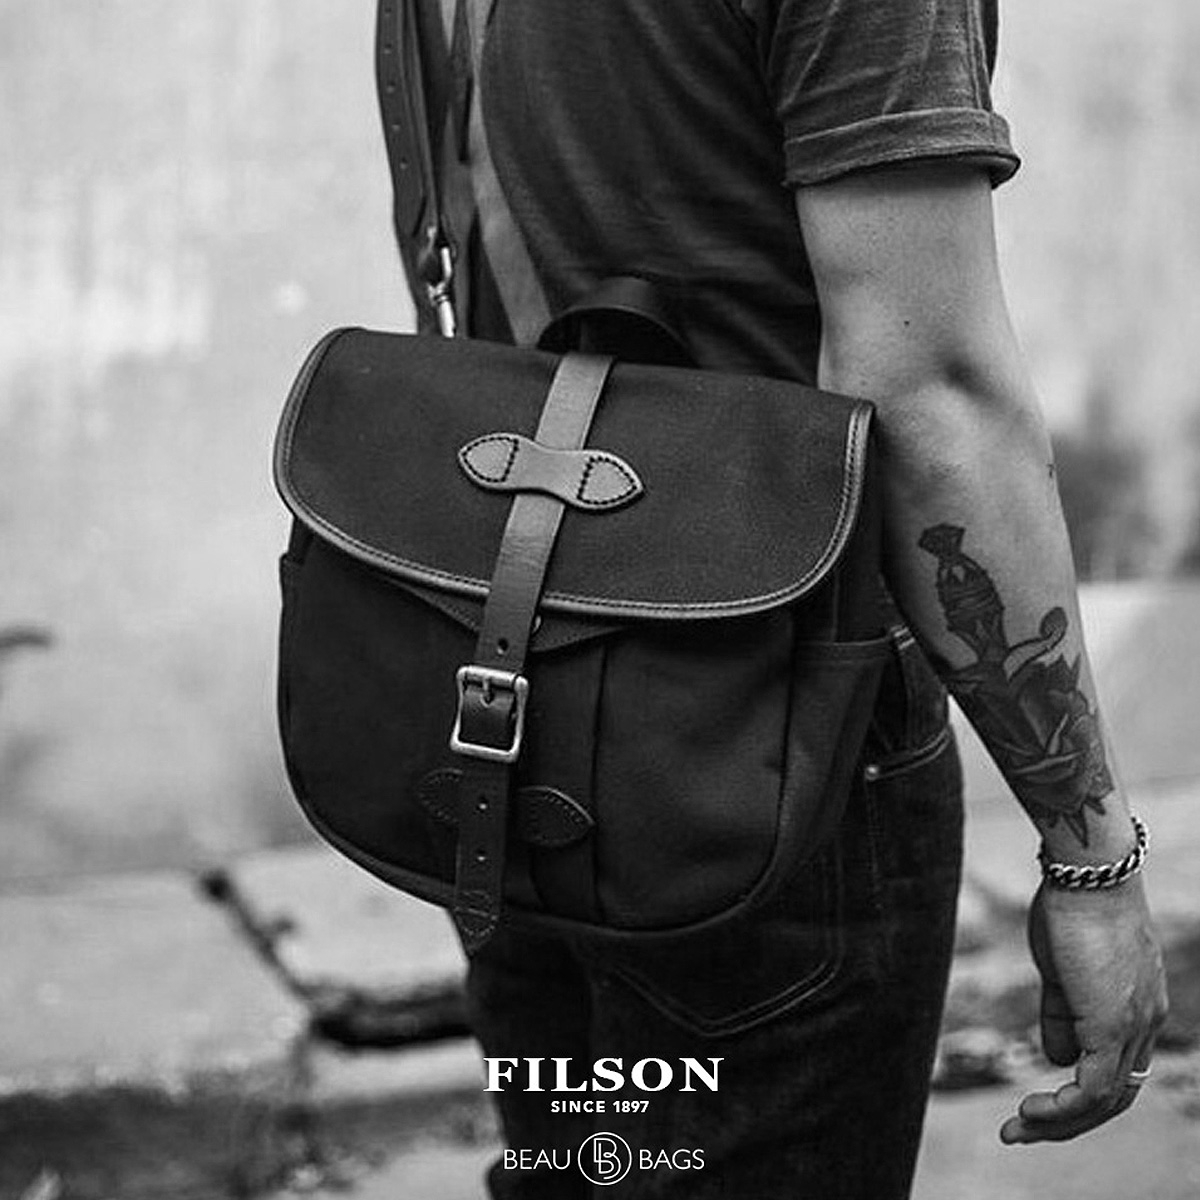 Filson Field Bag Small Black, the perfect, long-lasting, EDC (every day carry) bag for on the go